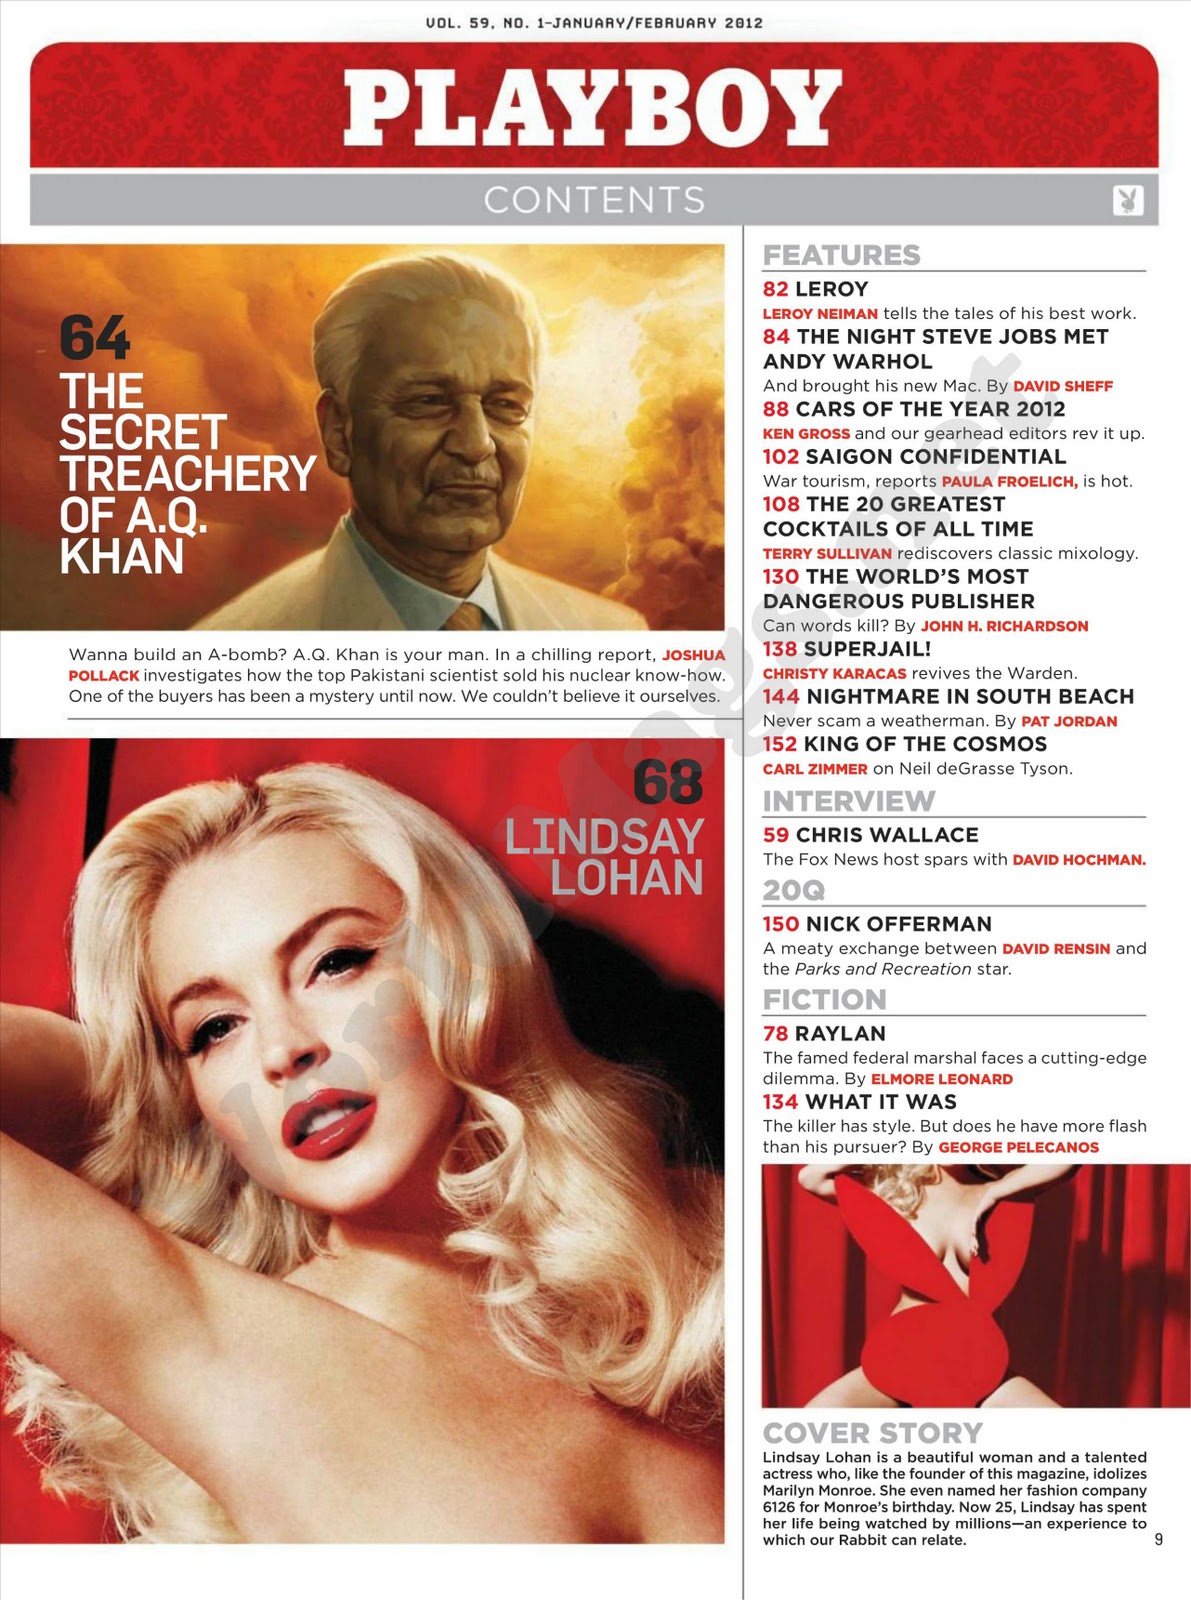 Lindsay_Lohan_s_Playboy_Cover_And_Pictures_Leaked_11.jpg